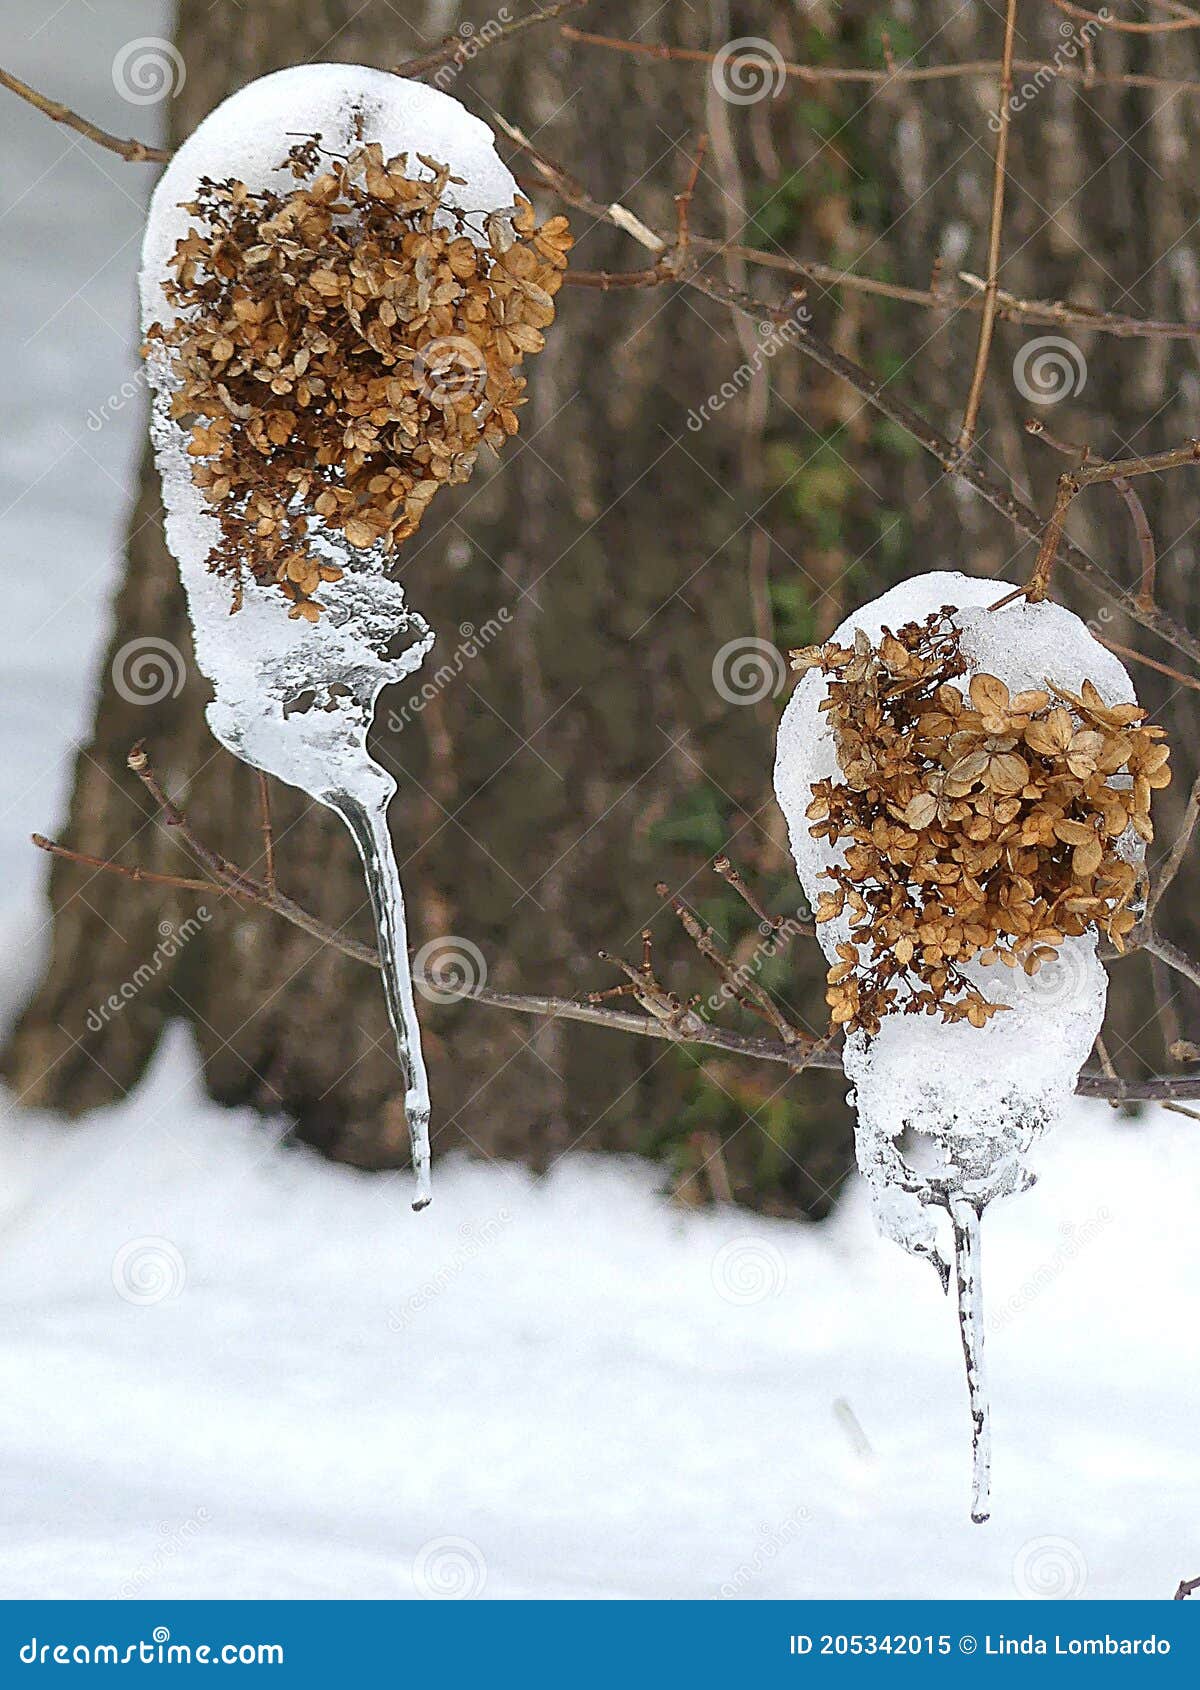 dried hydrangea flowers with snow and icicles in nature